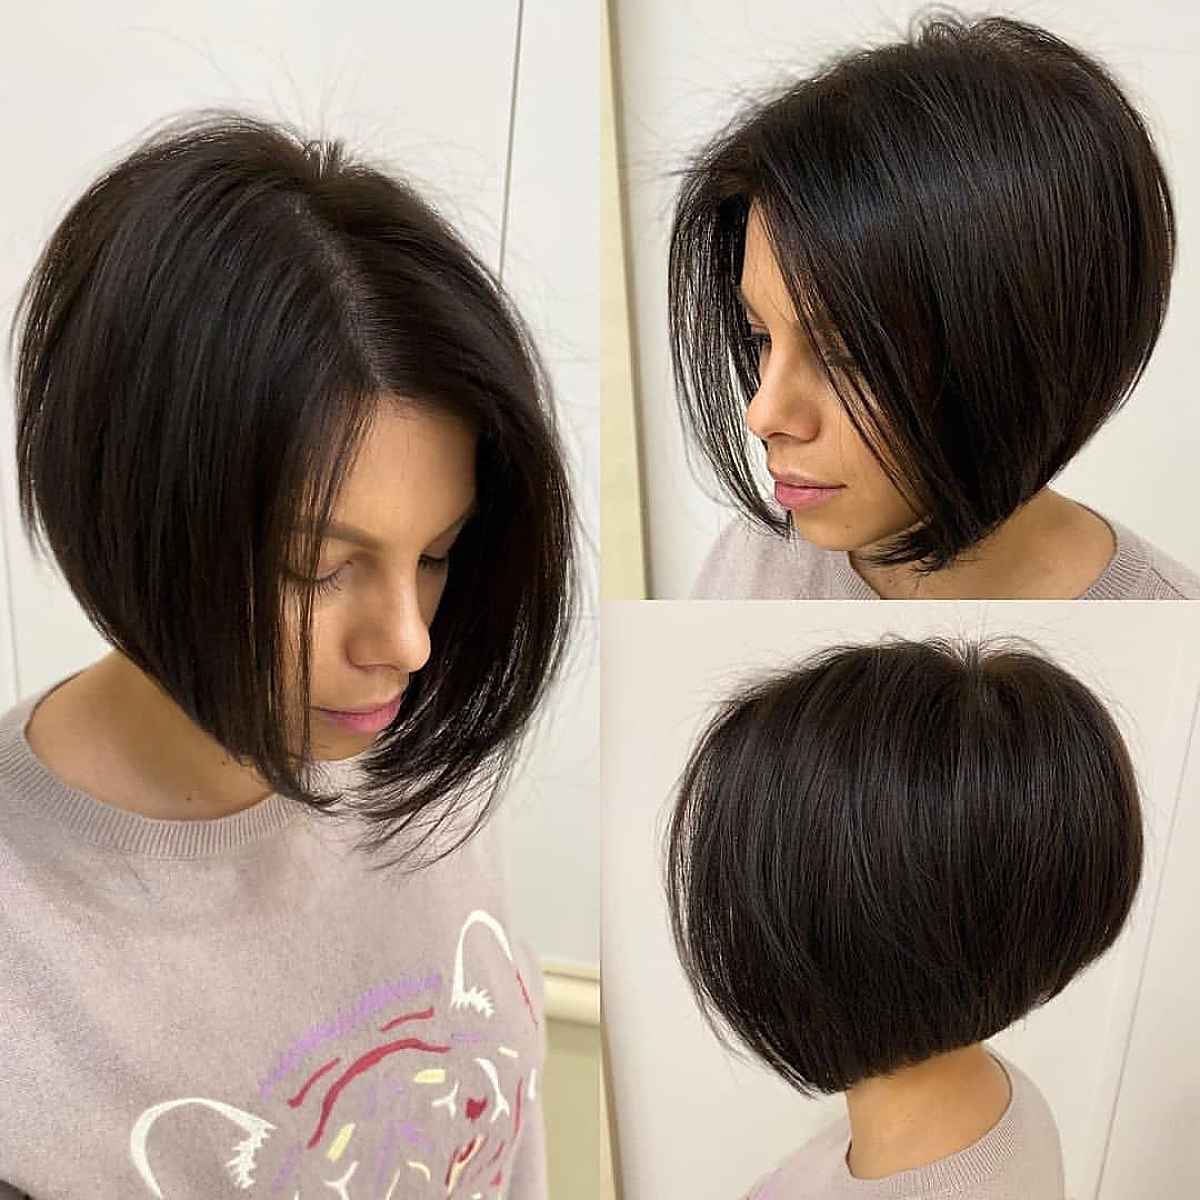 Short Graduated Bob Hairstyle for Straight Hair